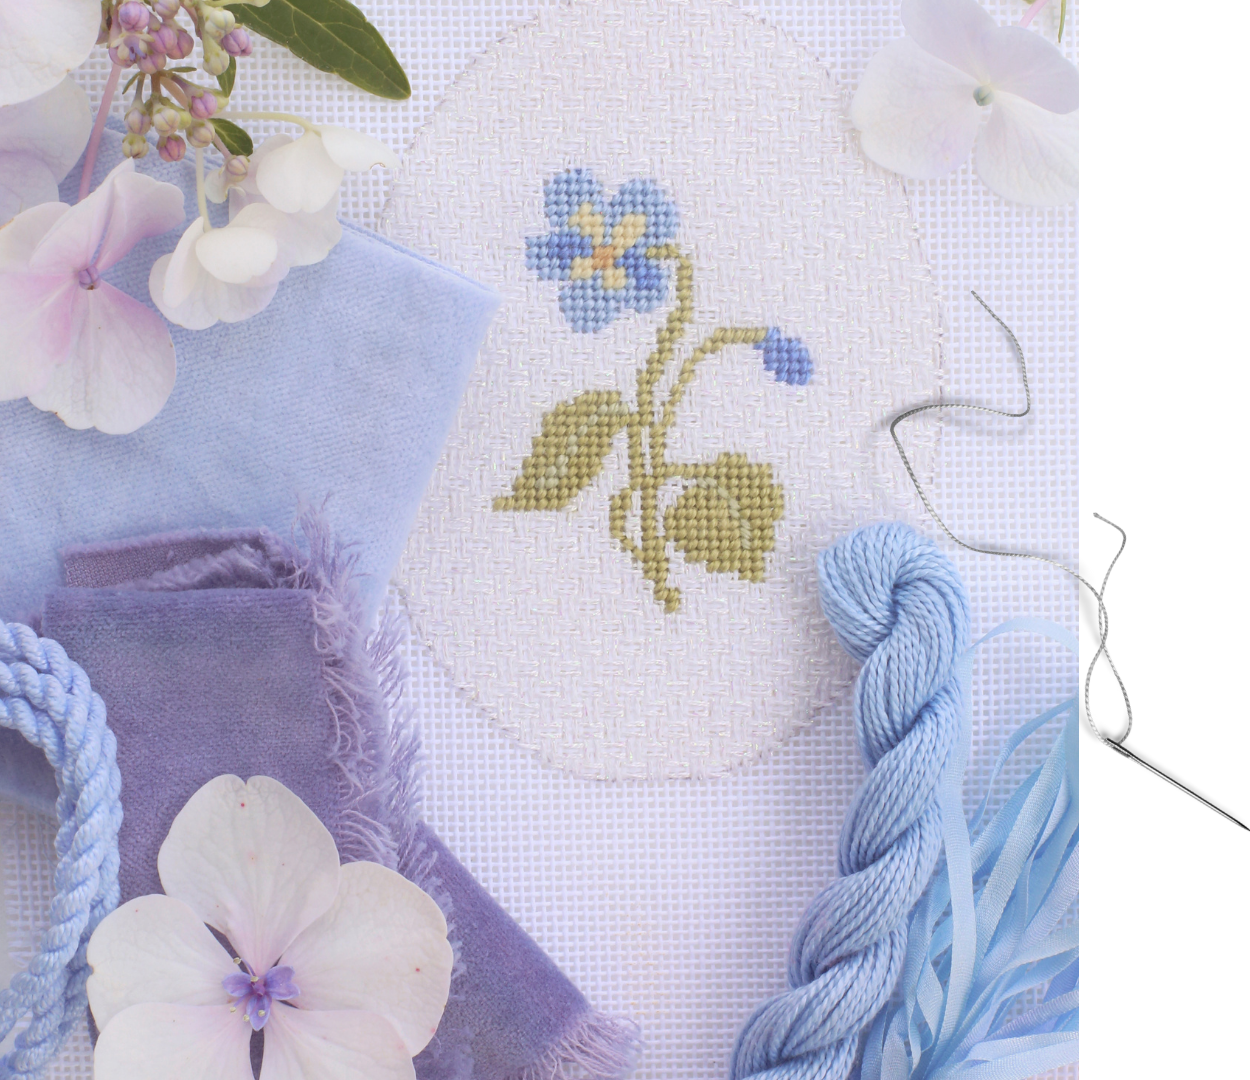 Blue wildflower needlepoint project with completed stitching, on a tabletop surrounded by fresh flowers, finishing fabric, thread, and cording.